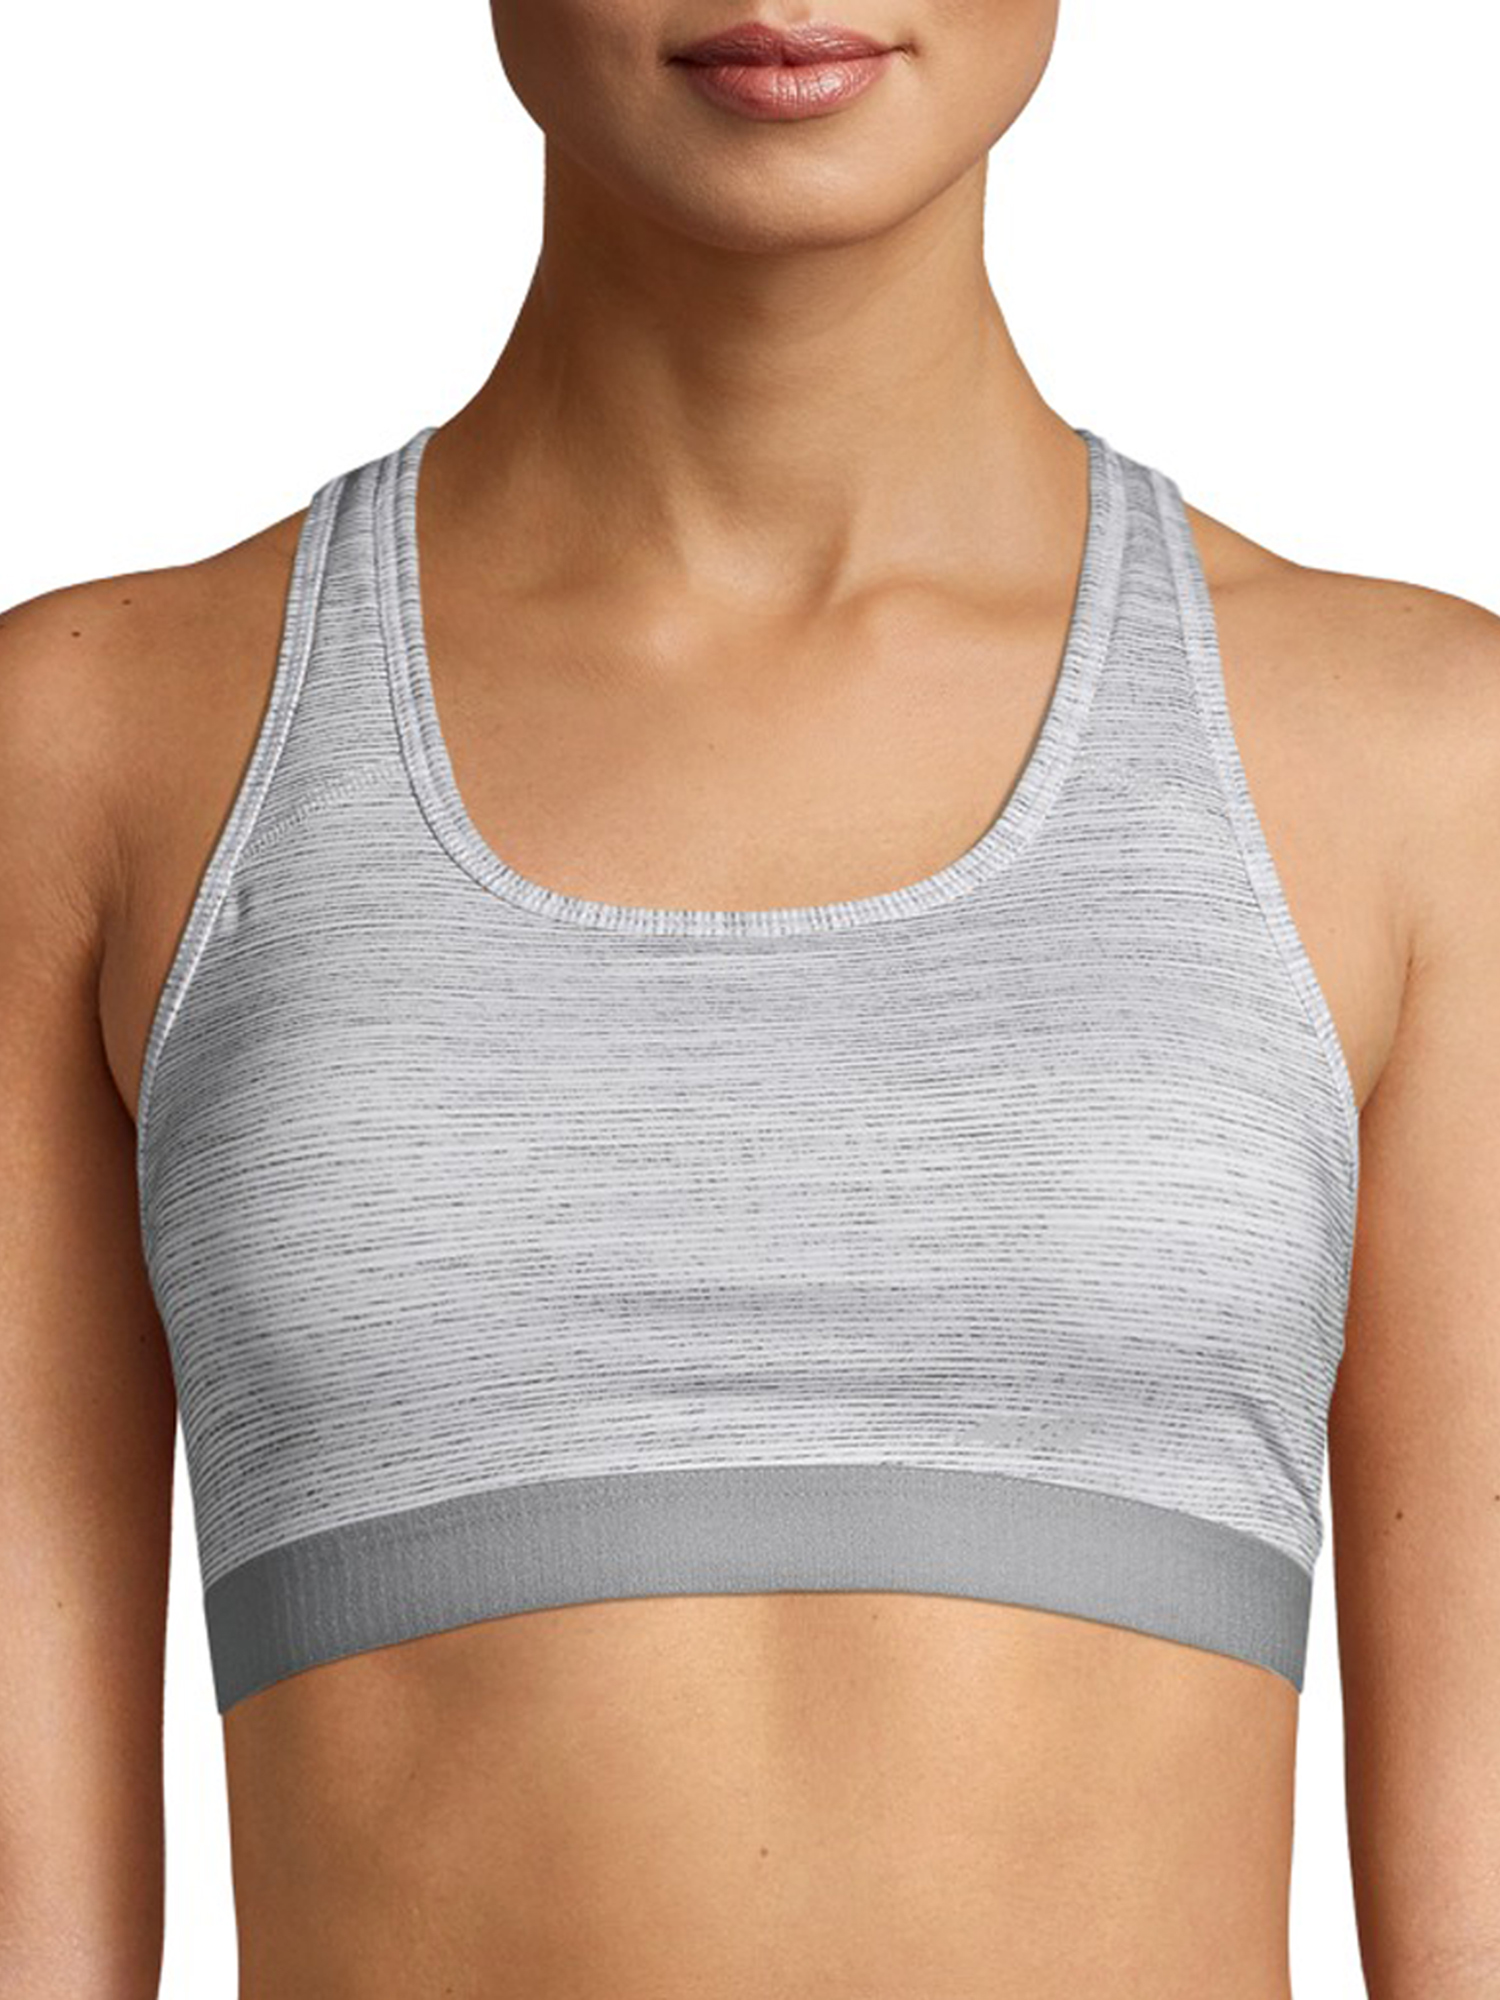 Buy Avia Womens Racerback Compression Sports Bra Online at Lowest Price in  Ubuy Saint Helena, Ascension and Tristan da Cunha. 256405411